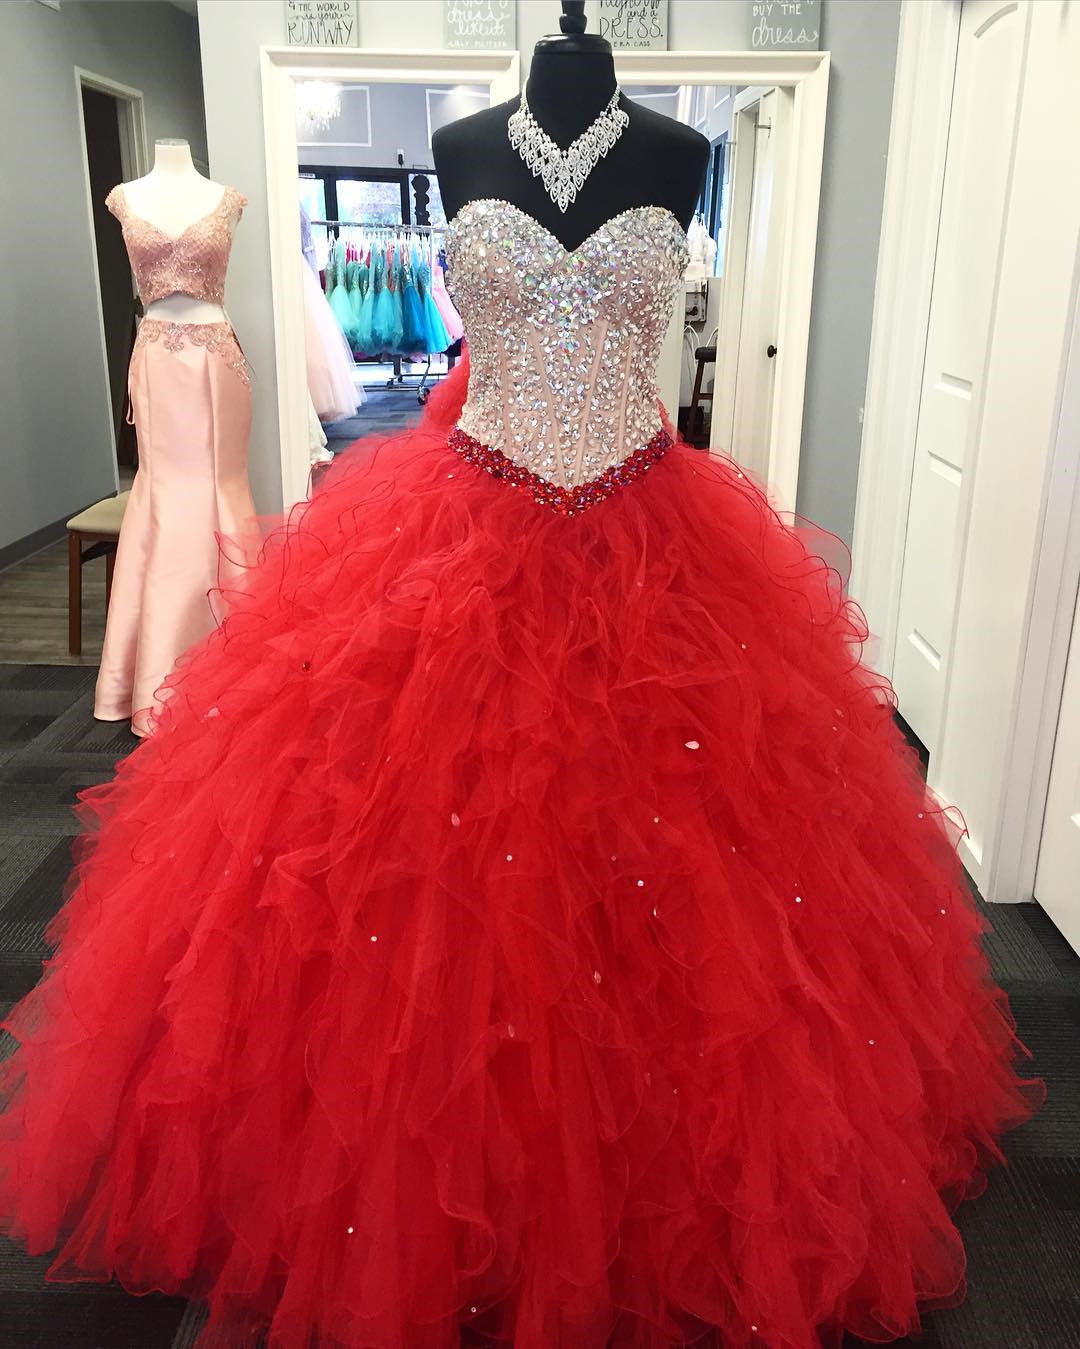 Crystal Beaded Sweetheart Organza Ruffles Ball Gowns Quinceanera Dresses 2017